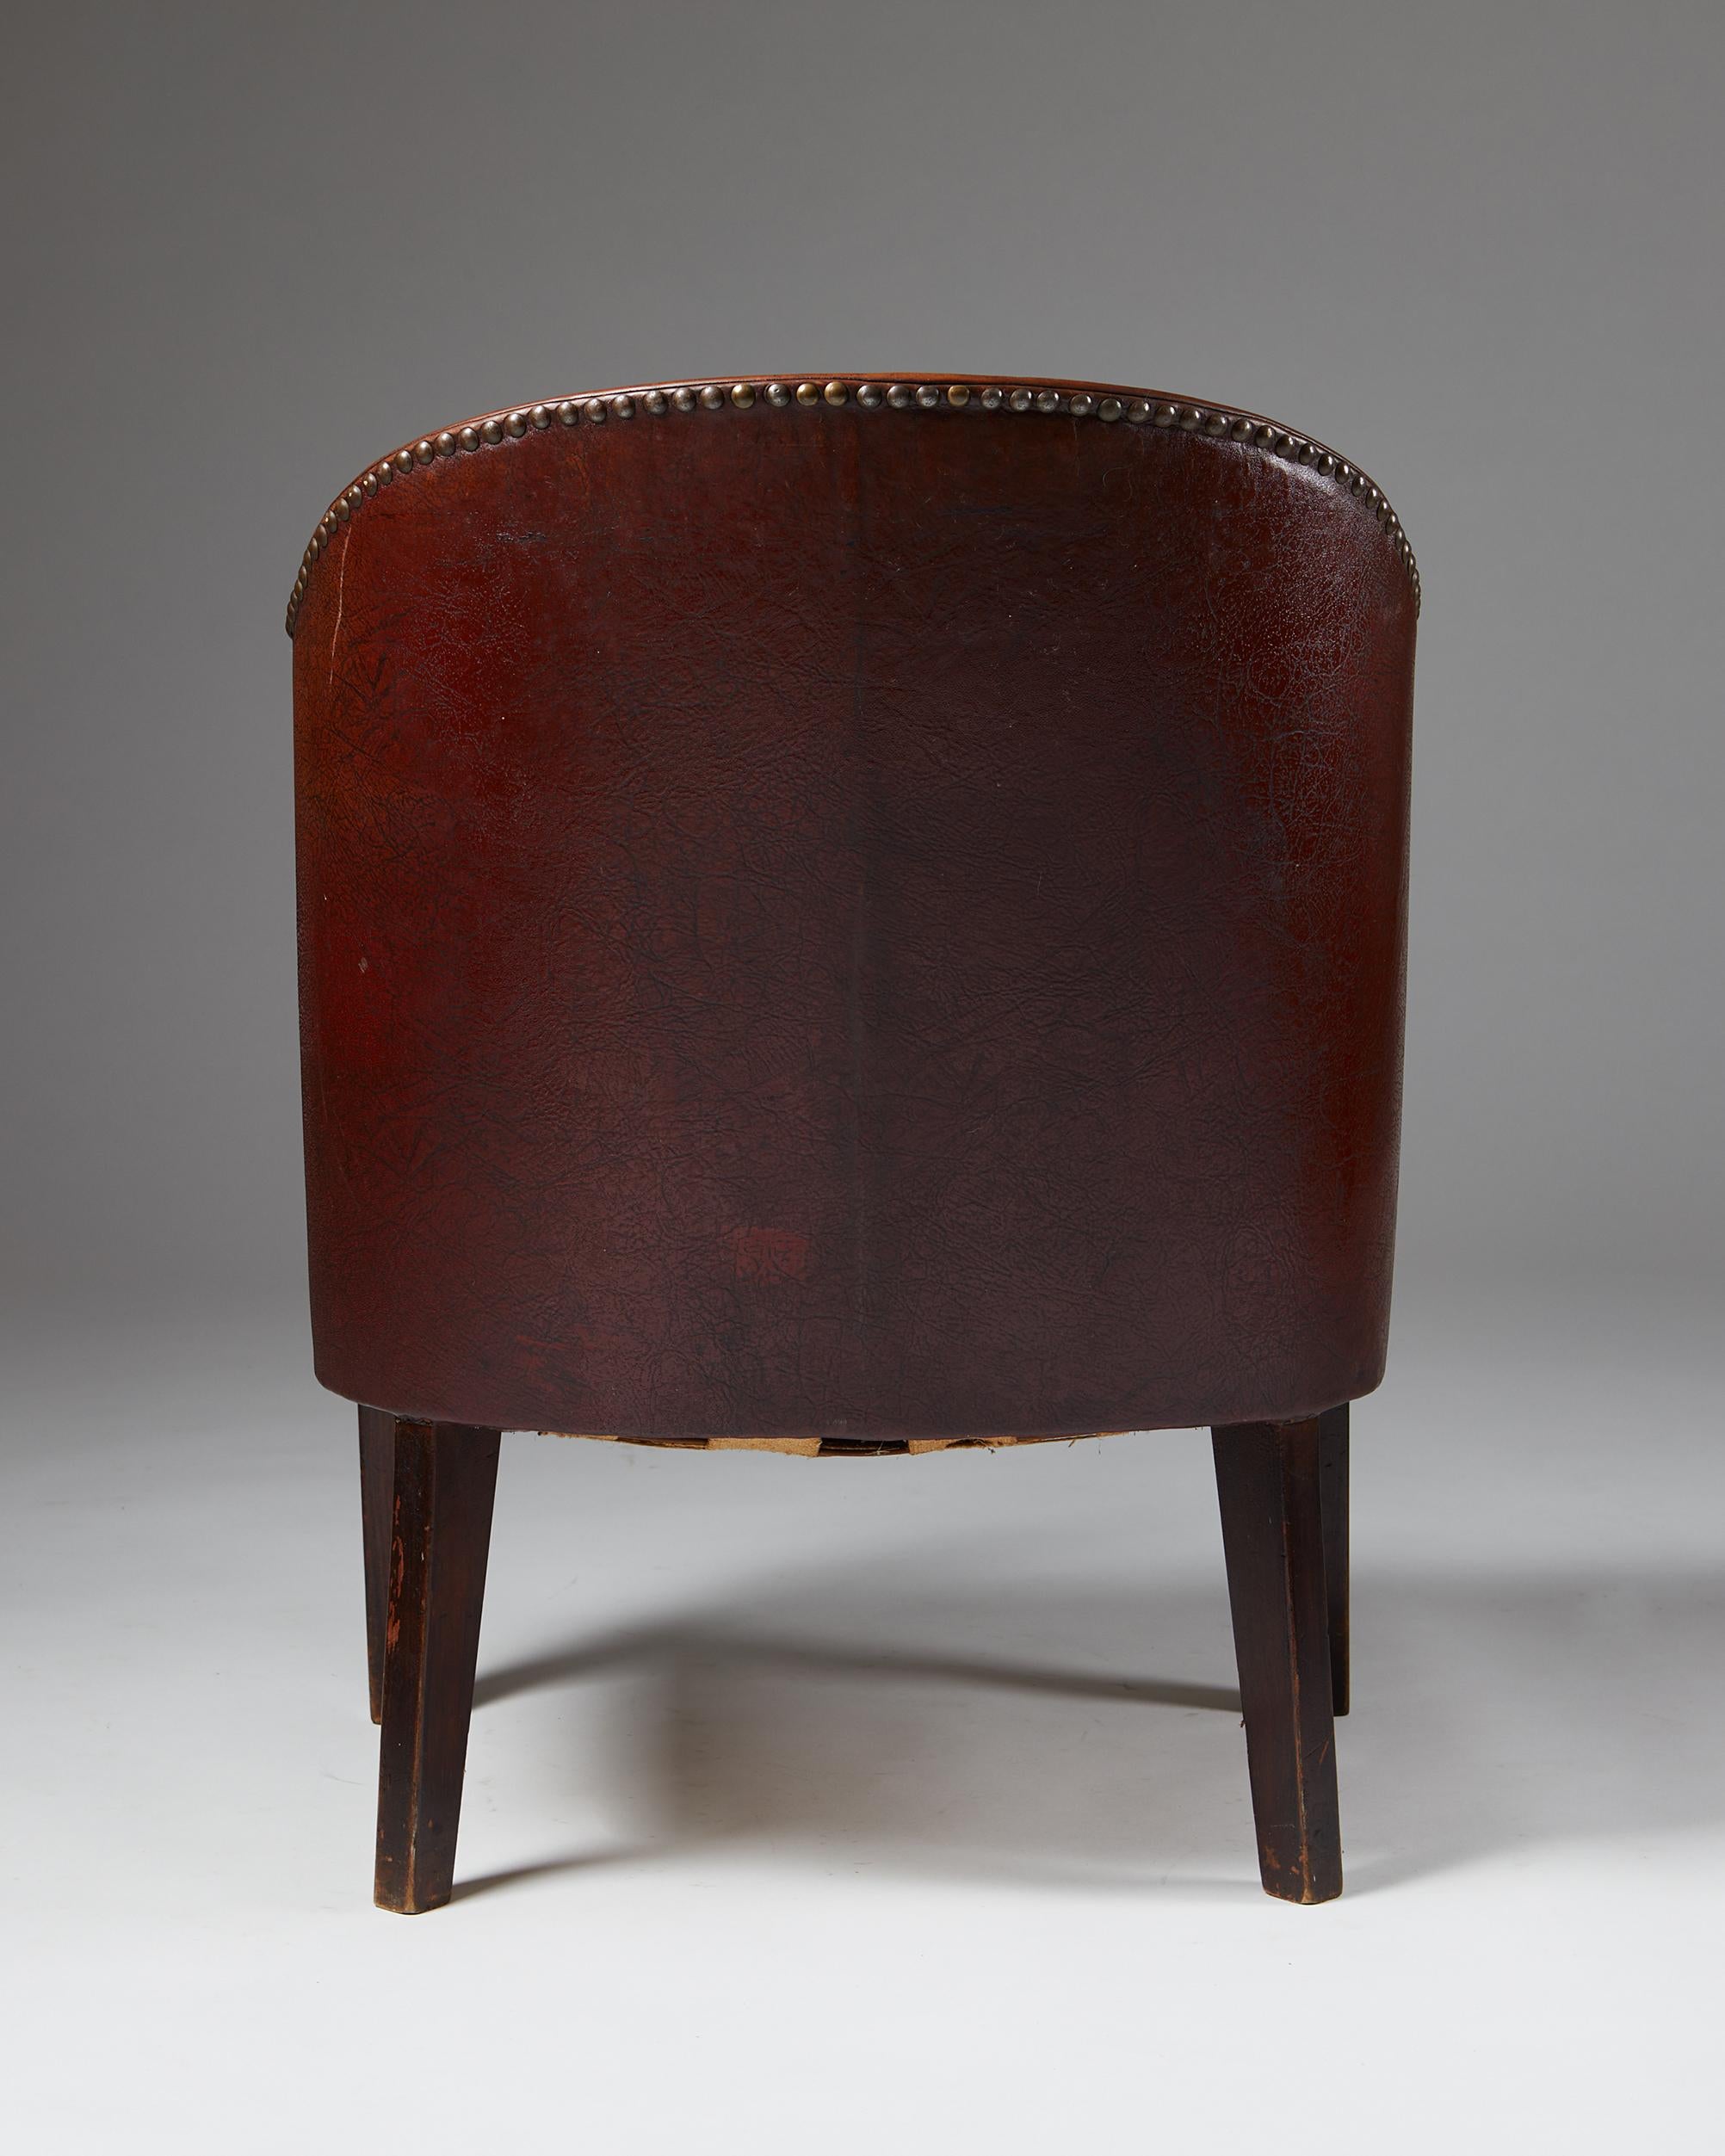 20th Century Lounge Chair, Designed by Kay Fisker